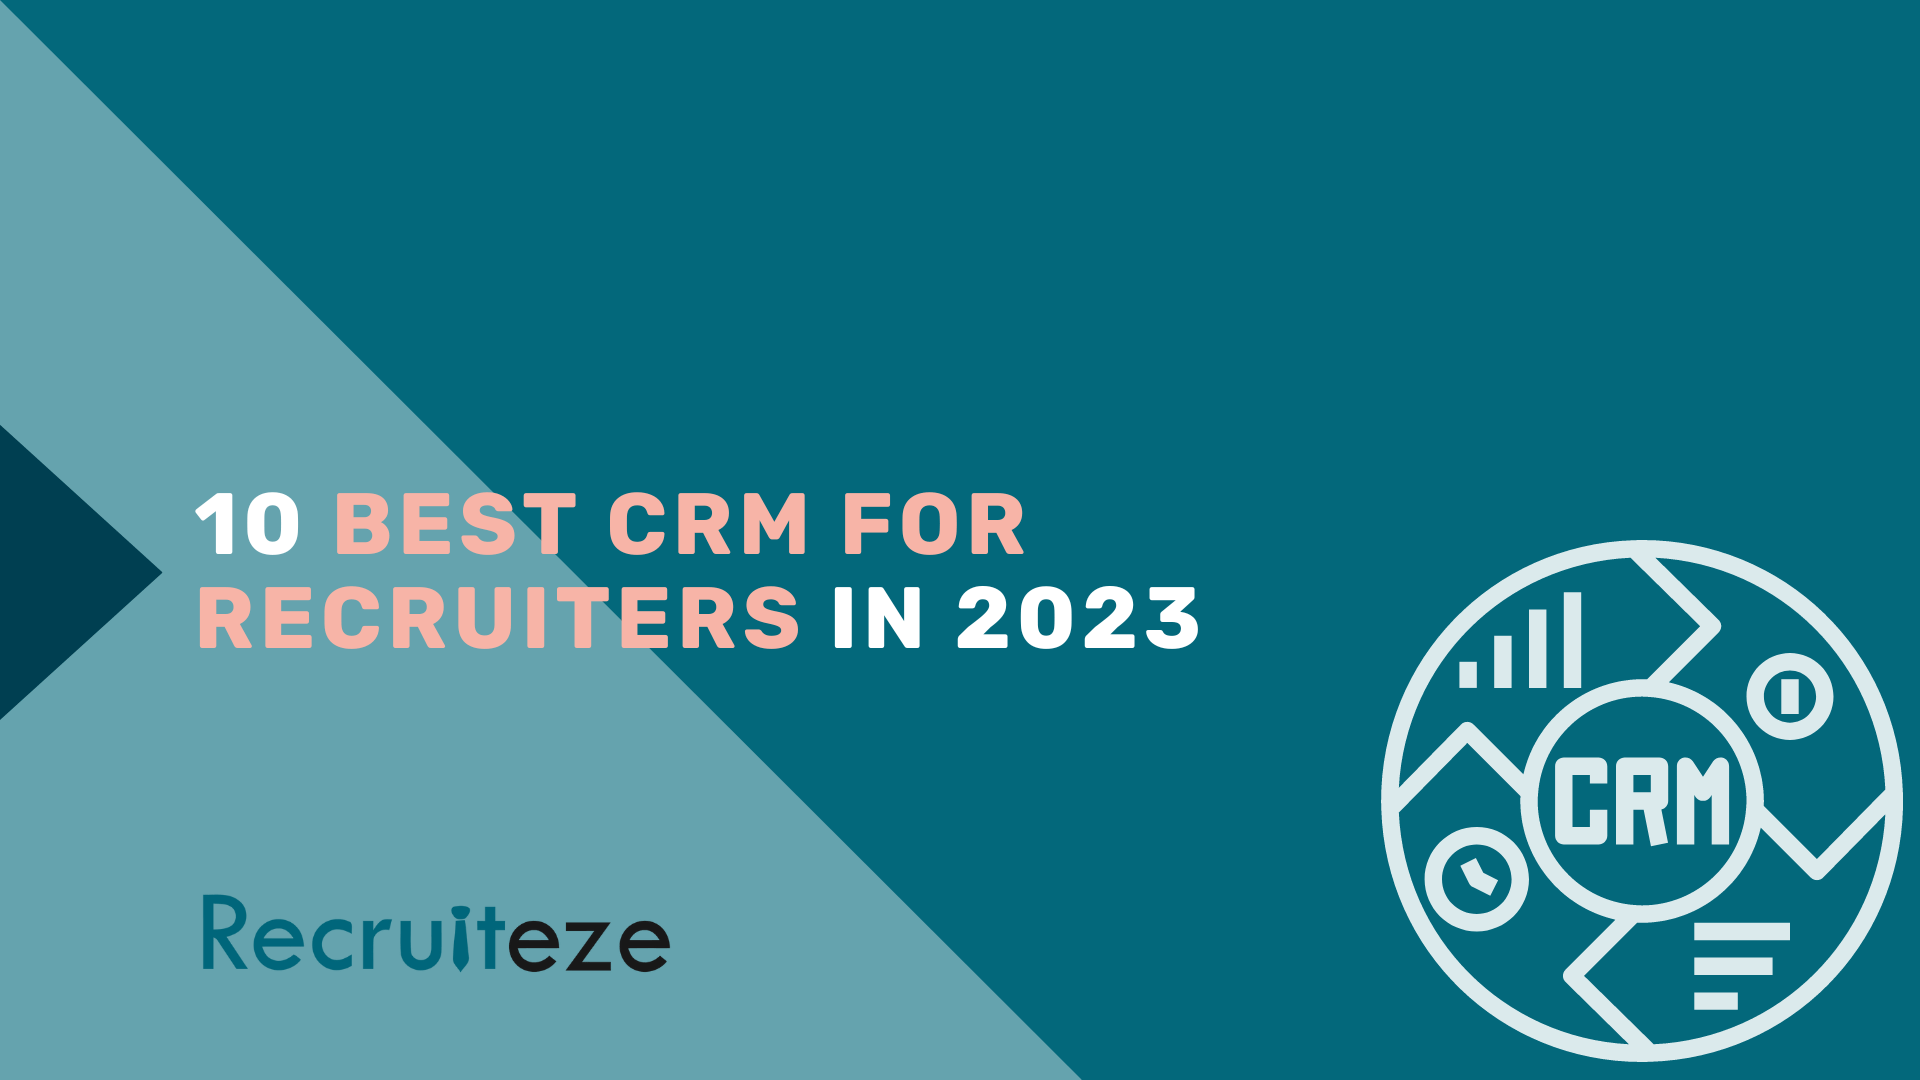 crm for recruiters